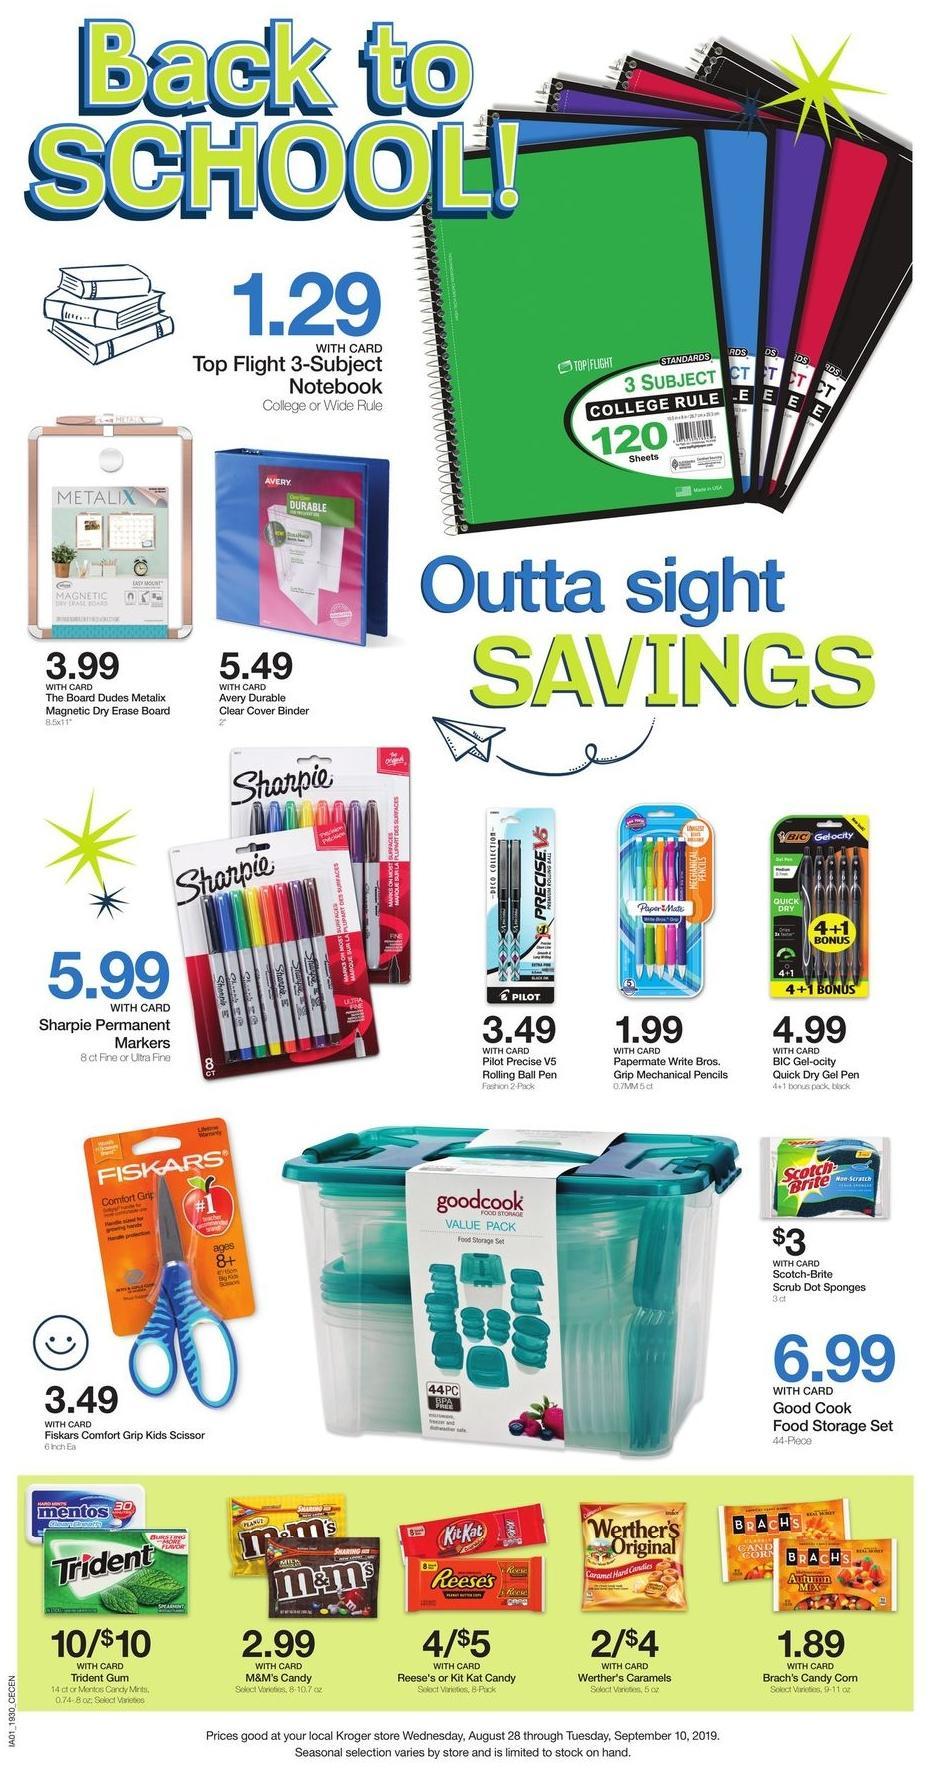 Kroger Weekly Ad from September 4